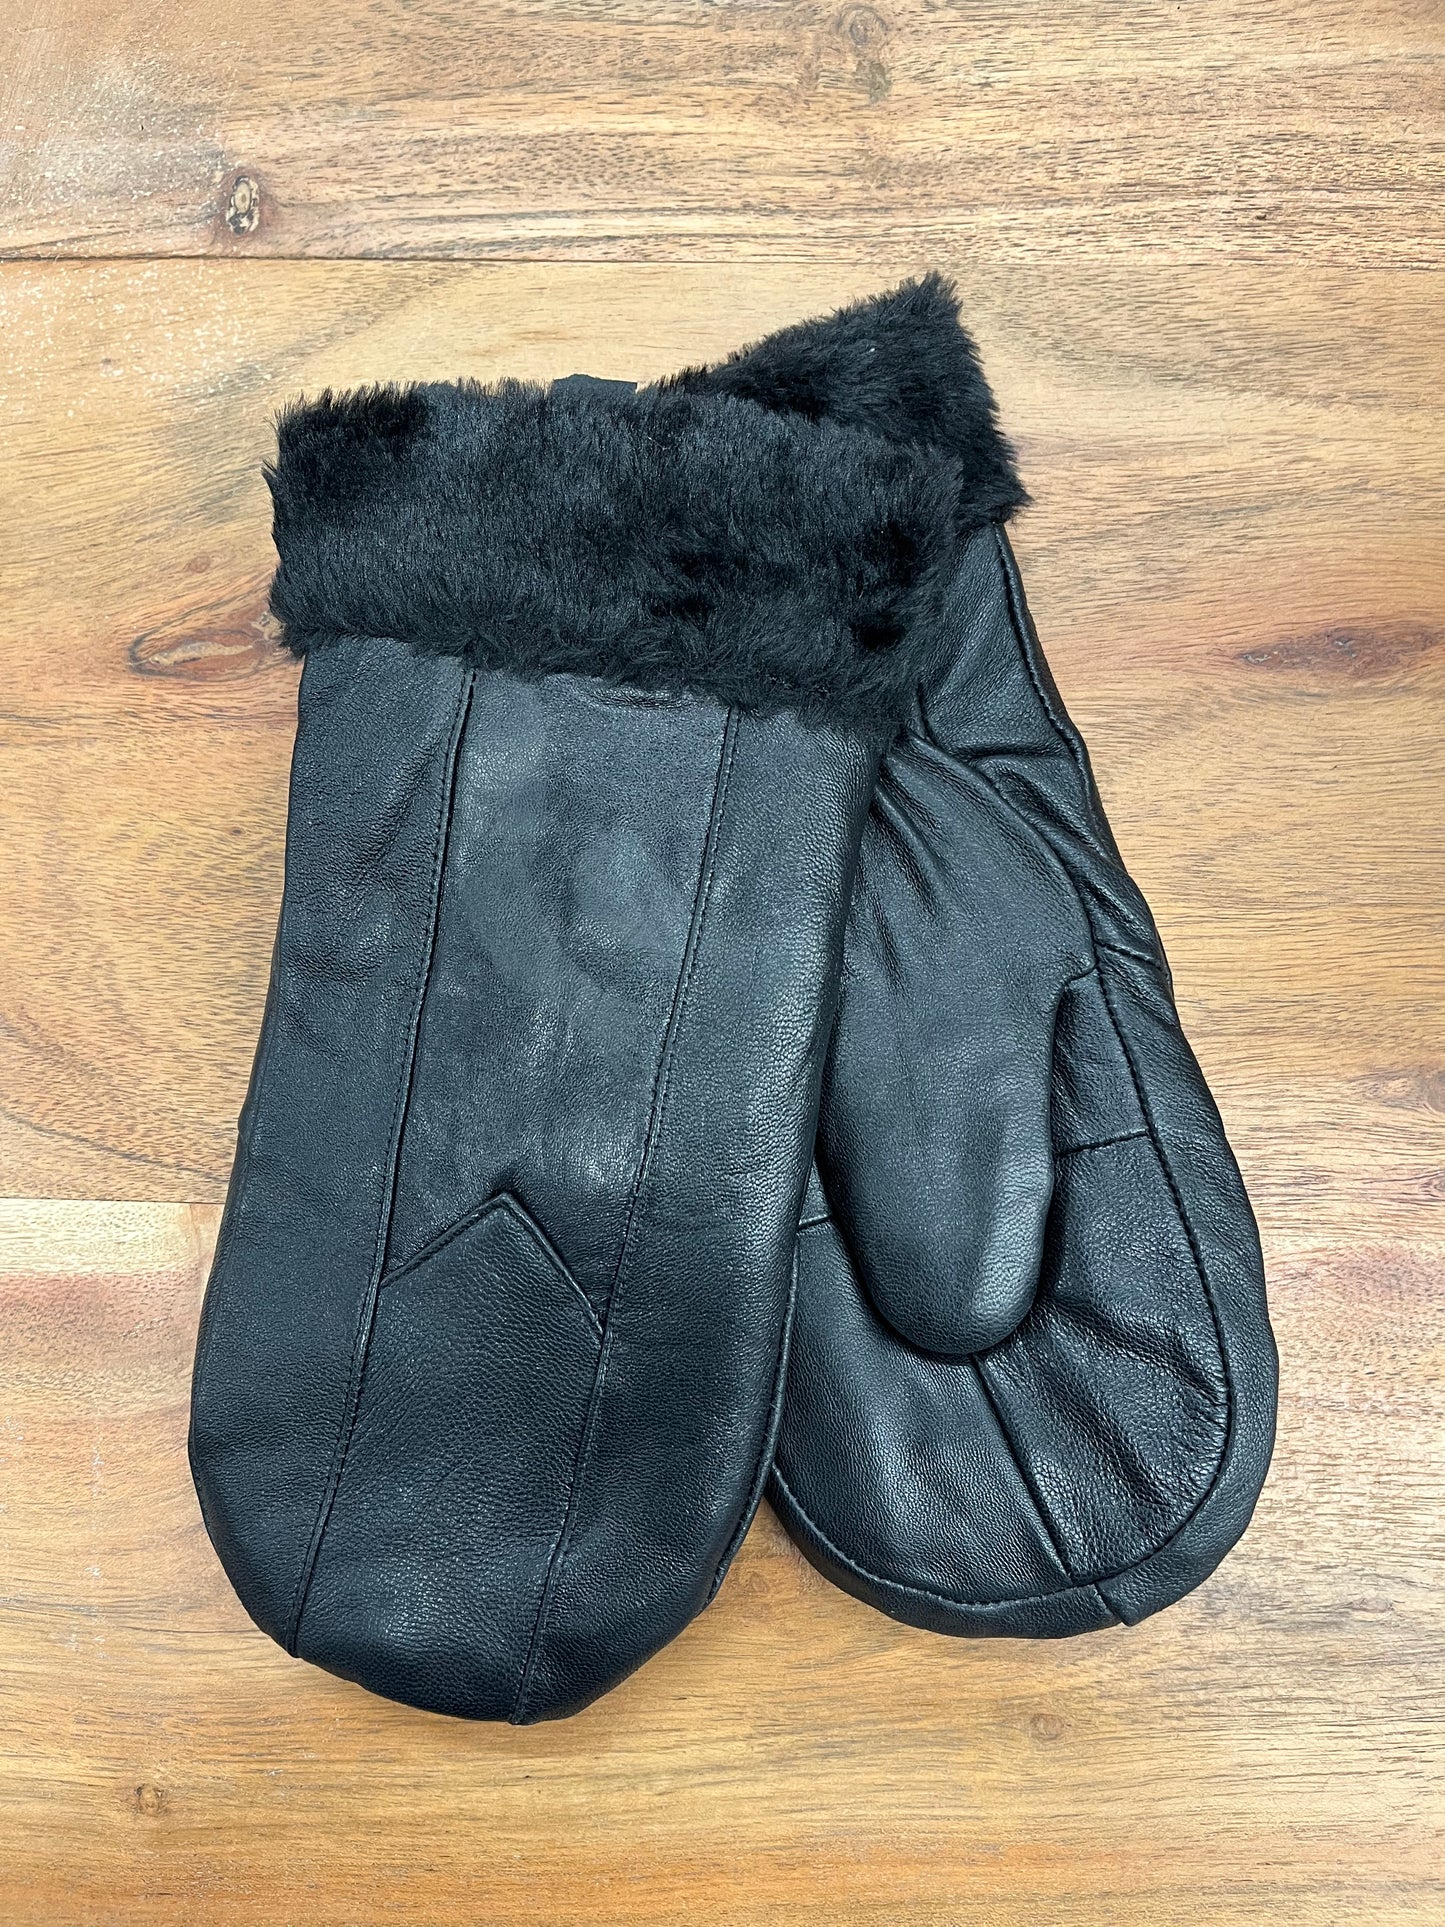 Albee Thinsulate Leather Mitts w/Trim Black 8231L